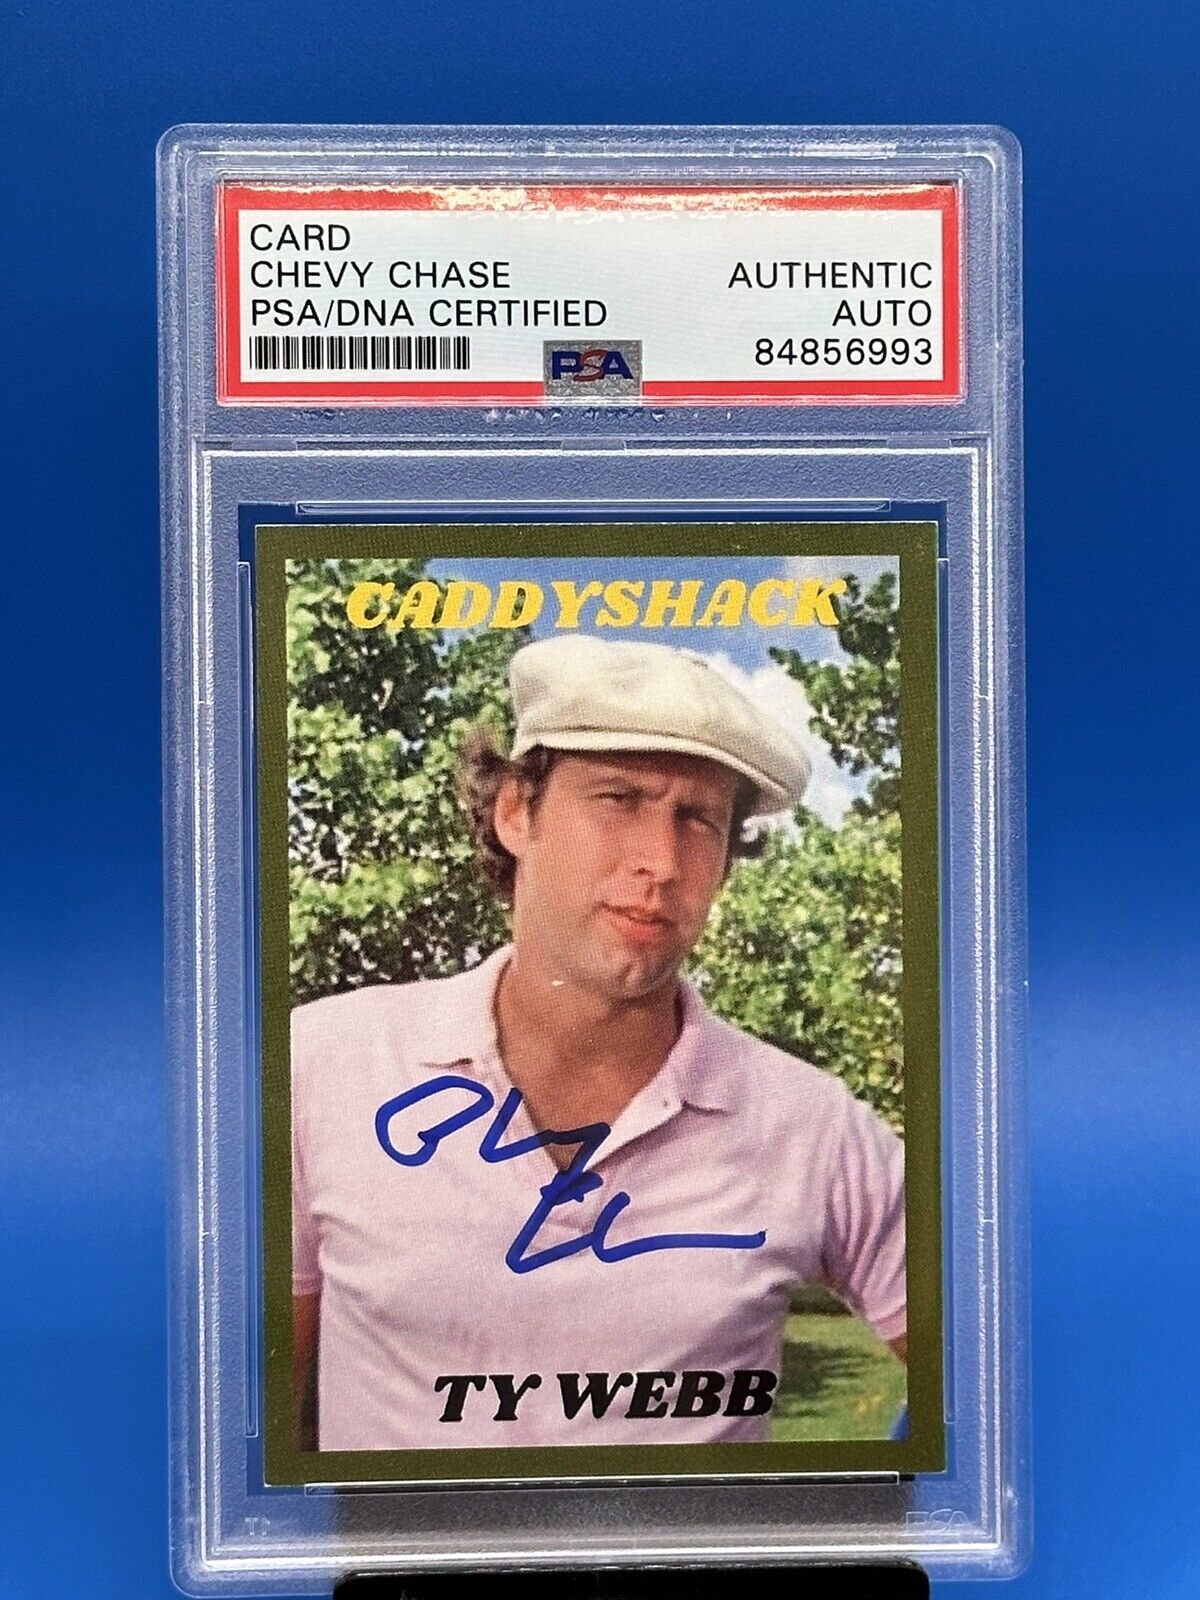 Chevy Chase Authentic Card PSA/DNA Certified AUTO Caddy Shack